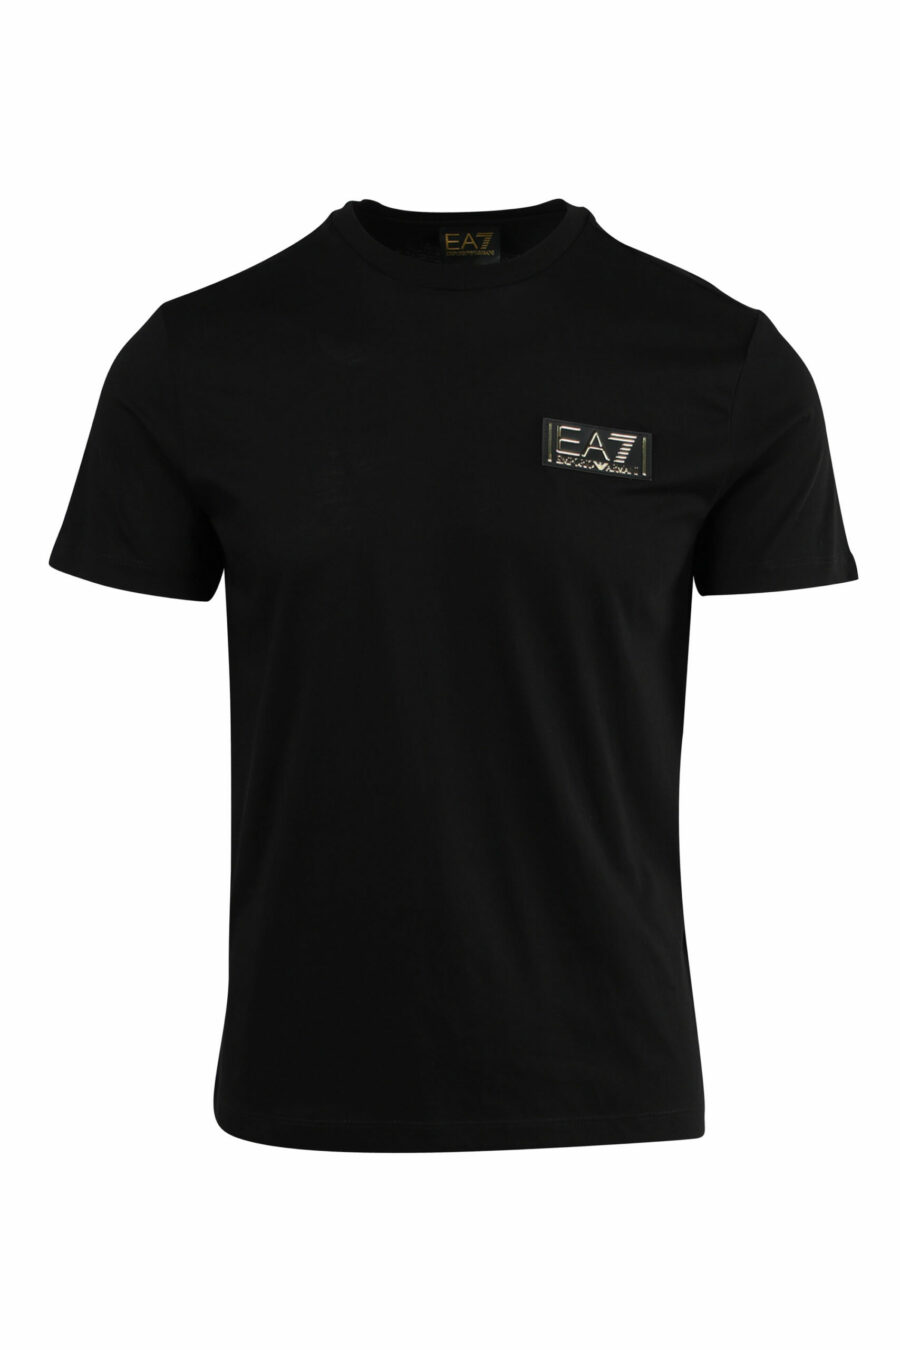 Black T-shirt with gold "lux identity" mini-logo label - 8057767515805 scaled